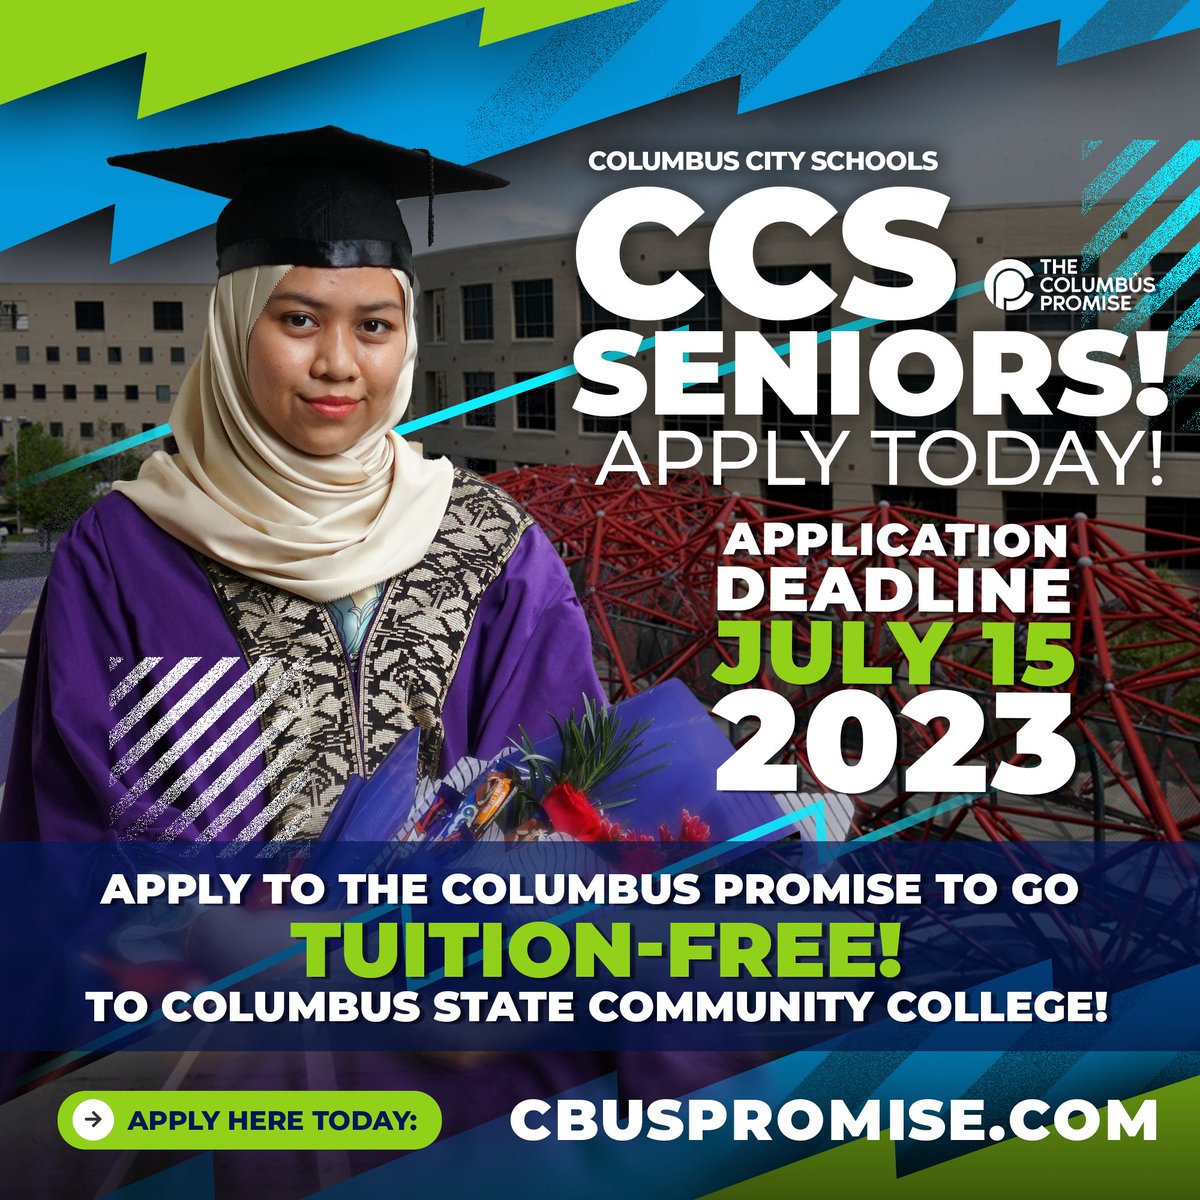 Still need to apply? DON'T WORRY!

#THECOLUMBUSPROMISE is STILL LIVE for CCS Seniors.

CLAIM YOUR SPOT in receiving a #TUITIONFREECOLLEGE experience by completing the FAFSA, applying to CSCC, and completing The Columbus Promise application. The Promise is still yours!

#WEPROMISE